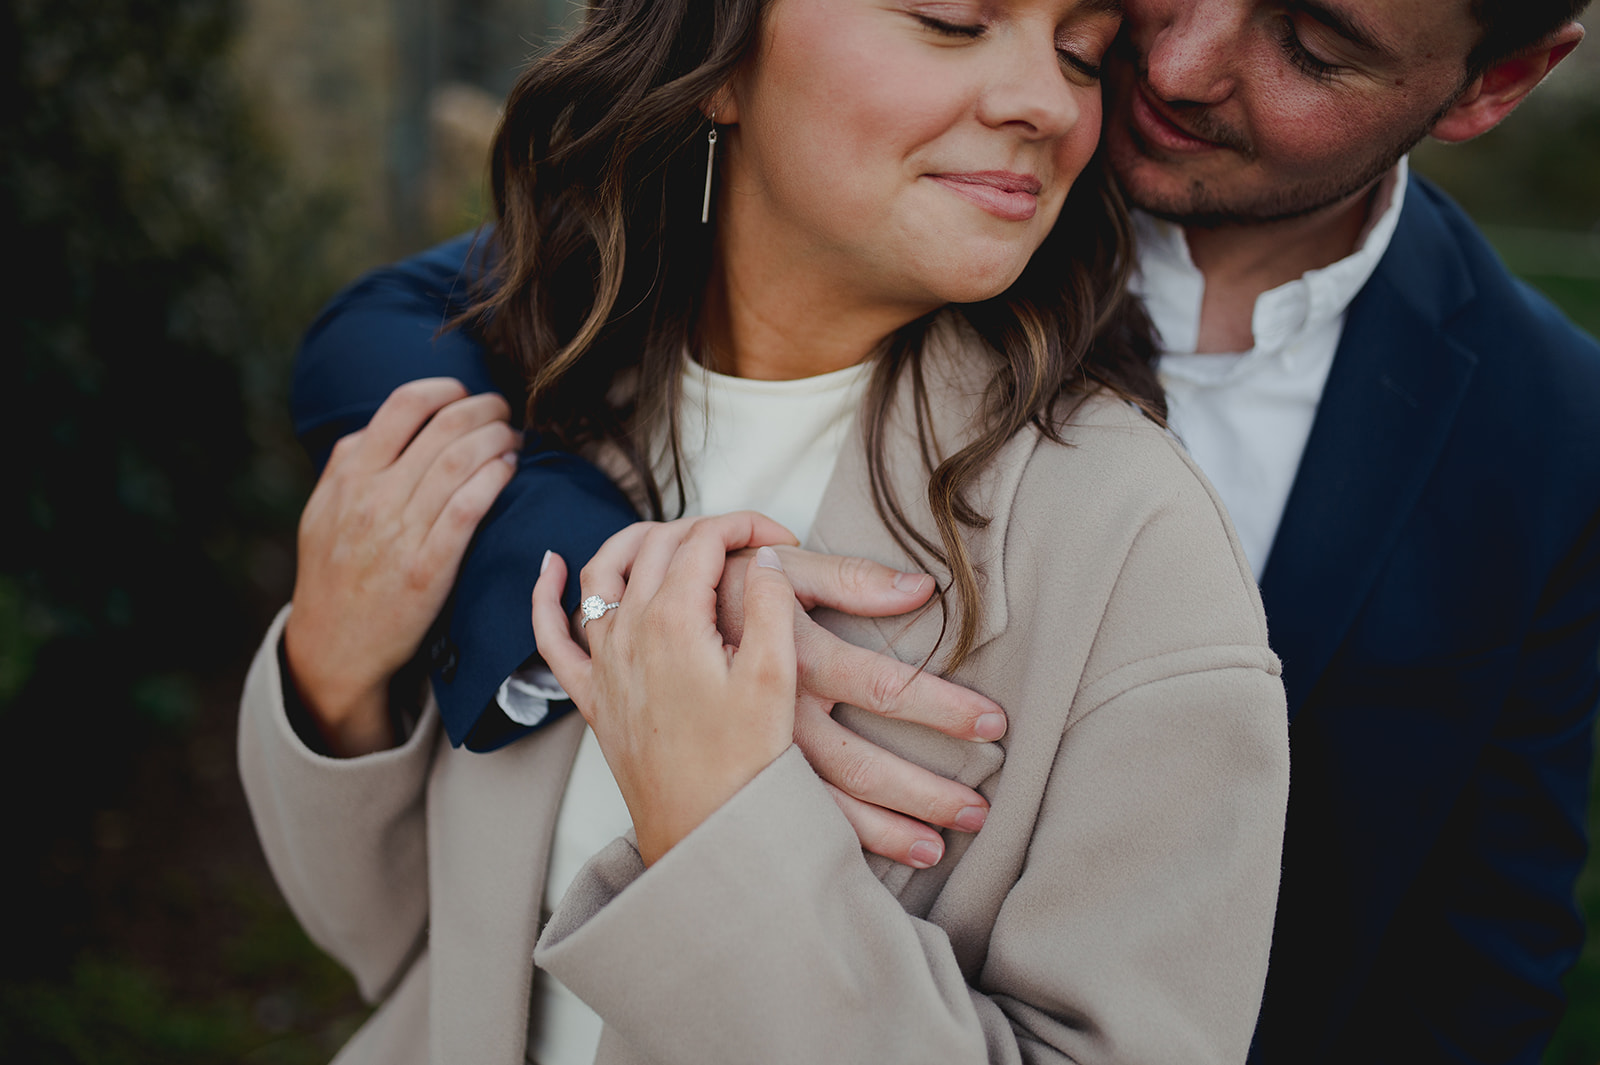 Unforgettable engagement session at the Bishop's Garden, capturing the couple's unique love story.